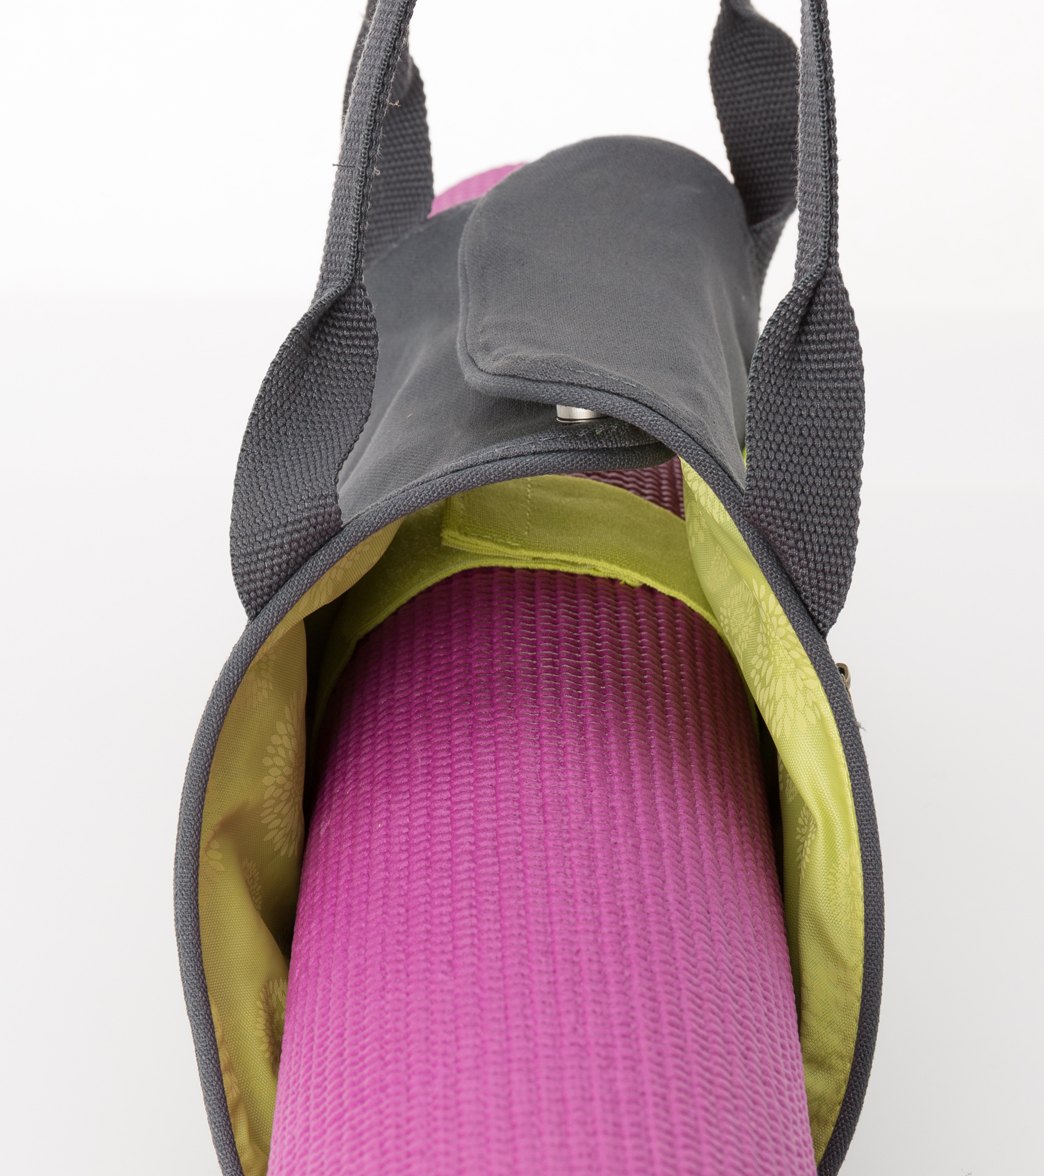 Gaiam On-The-Go Yoga Mat Carrier at